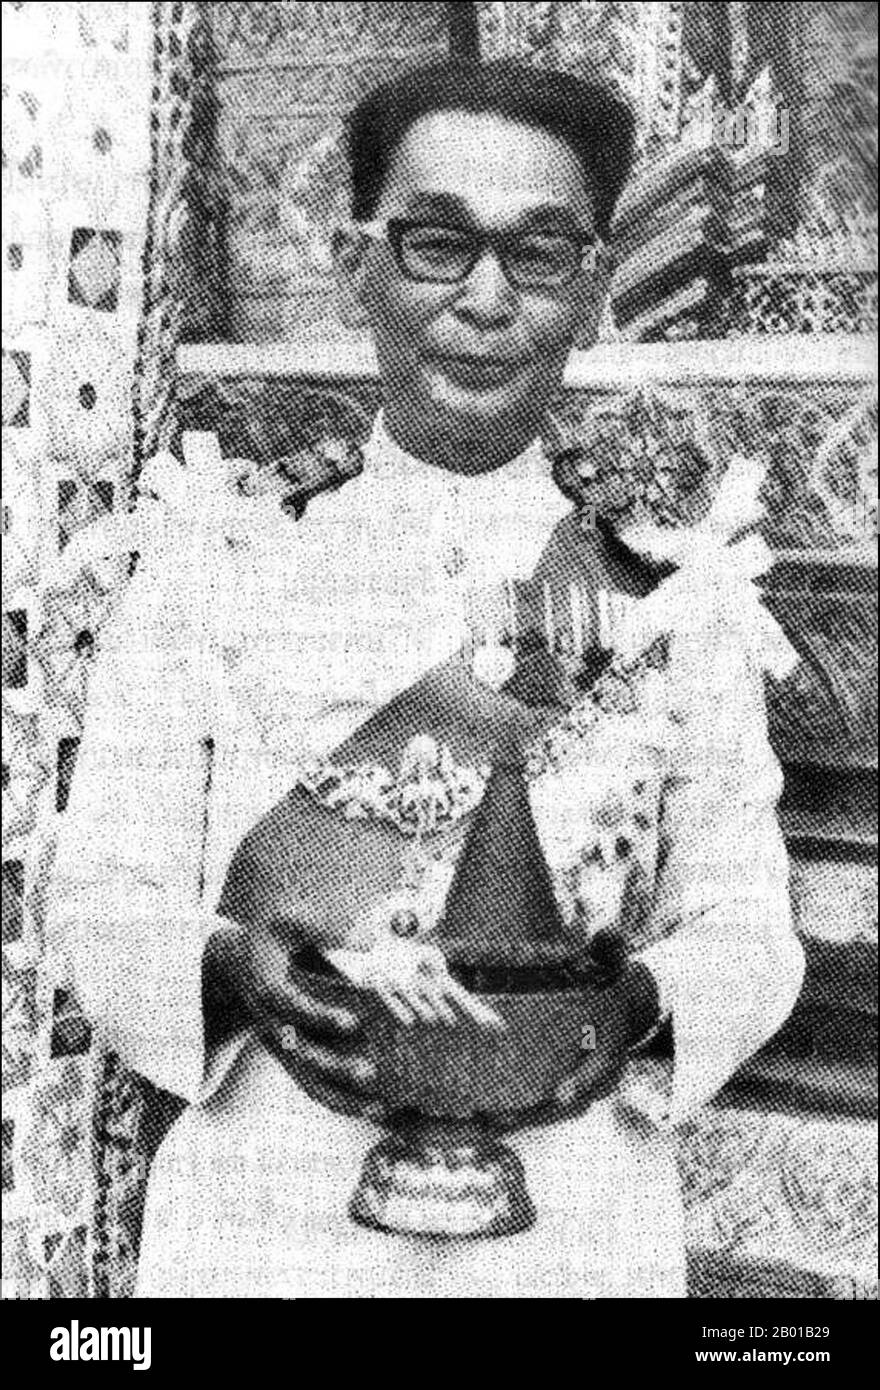 Thailand: Major Luang Khuang Abhaiwongse (17 May 1902 - 15 March 1968), Prime Minister of Thailand (r. 1944-1945; 31 January 1946 - 24 March 1946; 1947-1948), c. 1940s.  Major Luang Khuang Abhaiwongse was Prime Minister three times. During WWII he received the title Major after joining the guard of King Prajadhipok (Rama VII). He was elected as Prime Minister on 1 August 1944, during Japanese occupation. On 17 August 1945 he resigned to make way for a new administration. His Democrat Party won the fourth national elections in 1946, and he became Prime Minister, albeit only for 45 days. Stock Photo